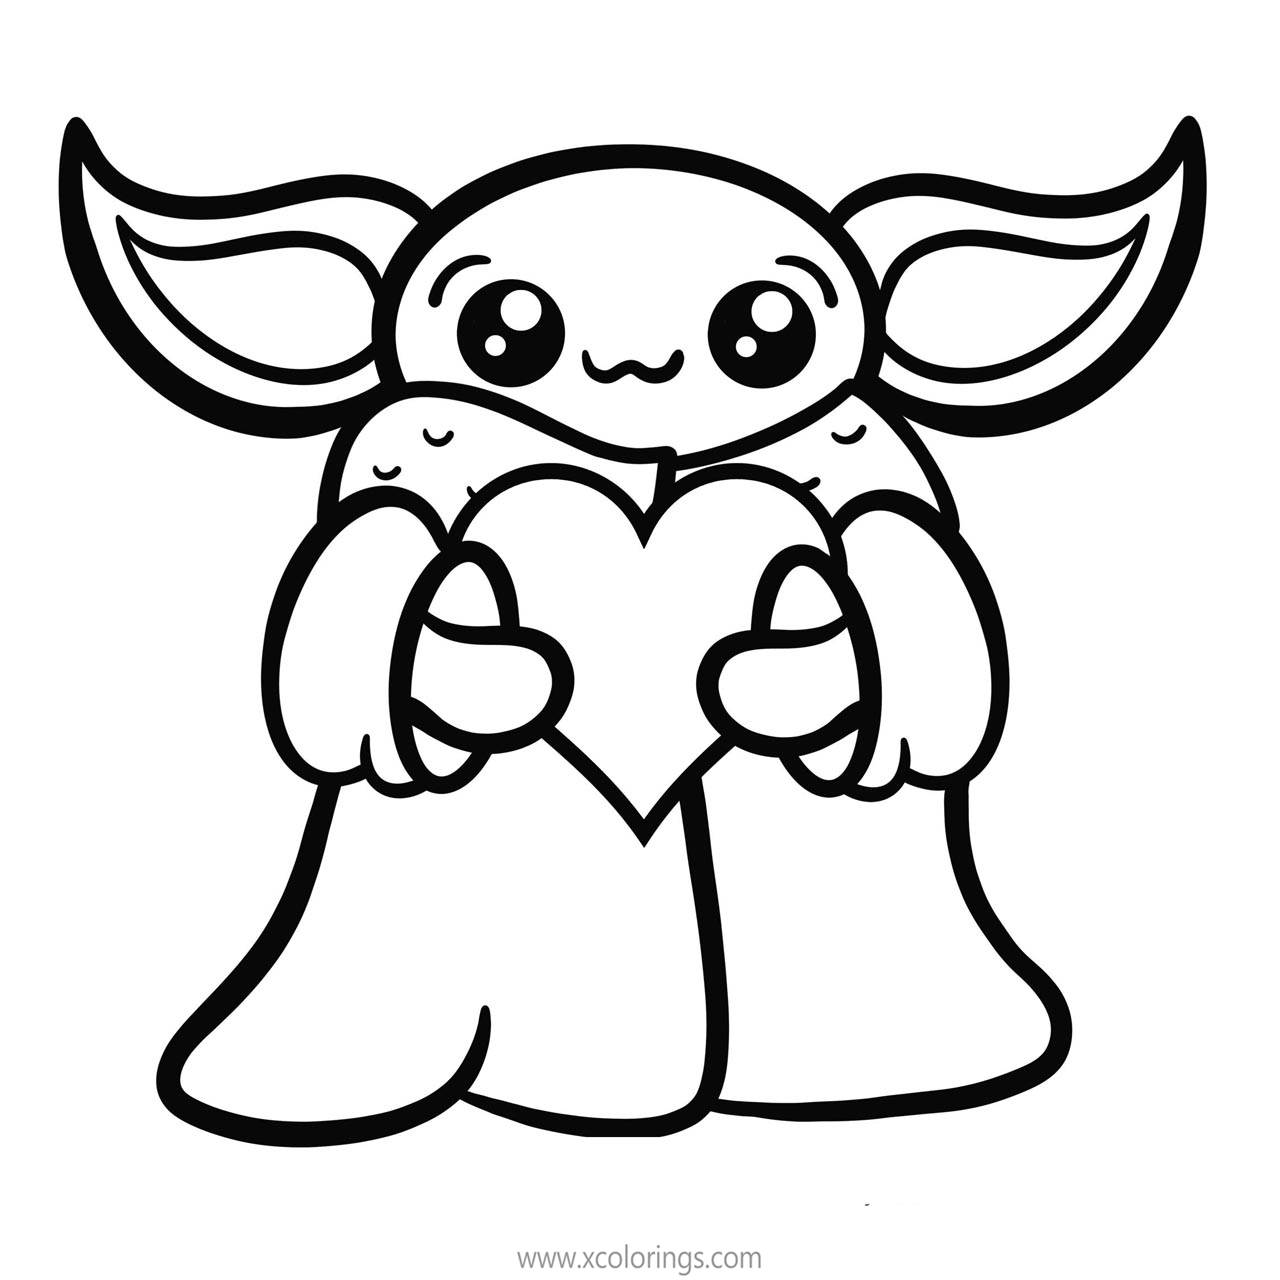 Baby Yoda and Stitch Coloring Pages - XColorings.com